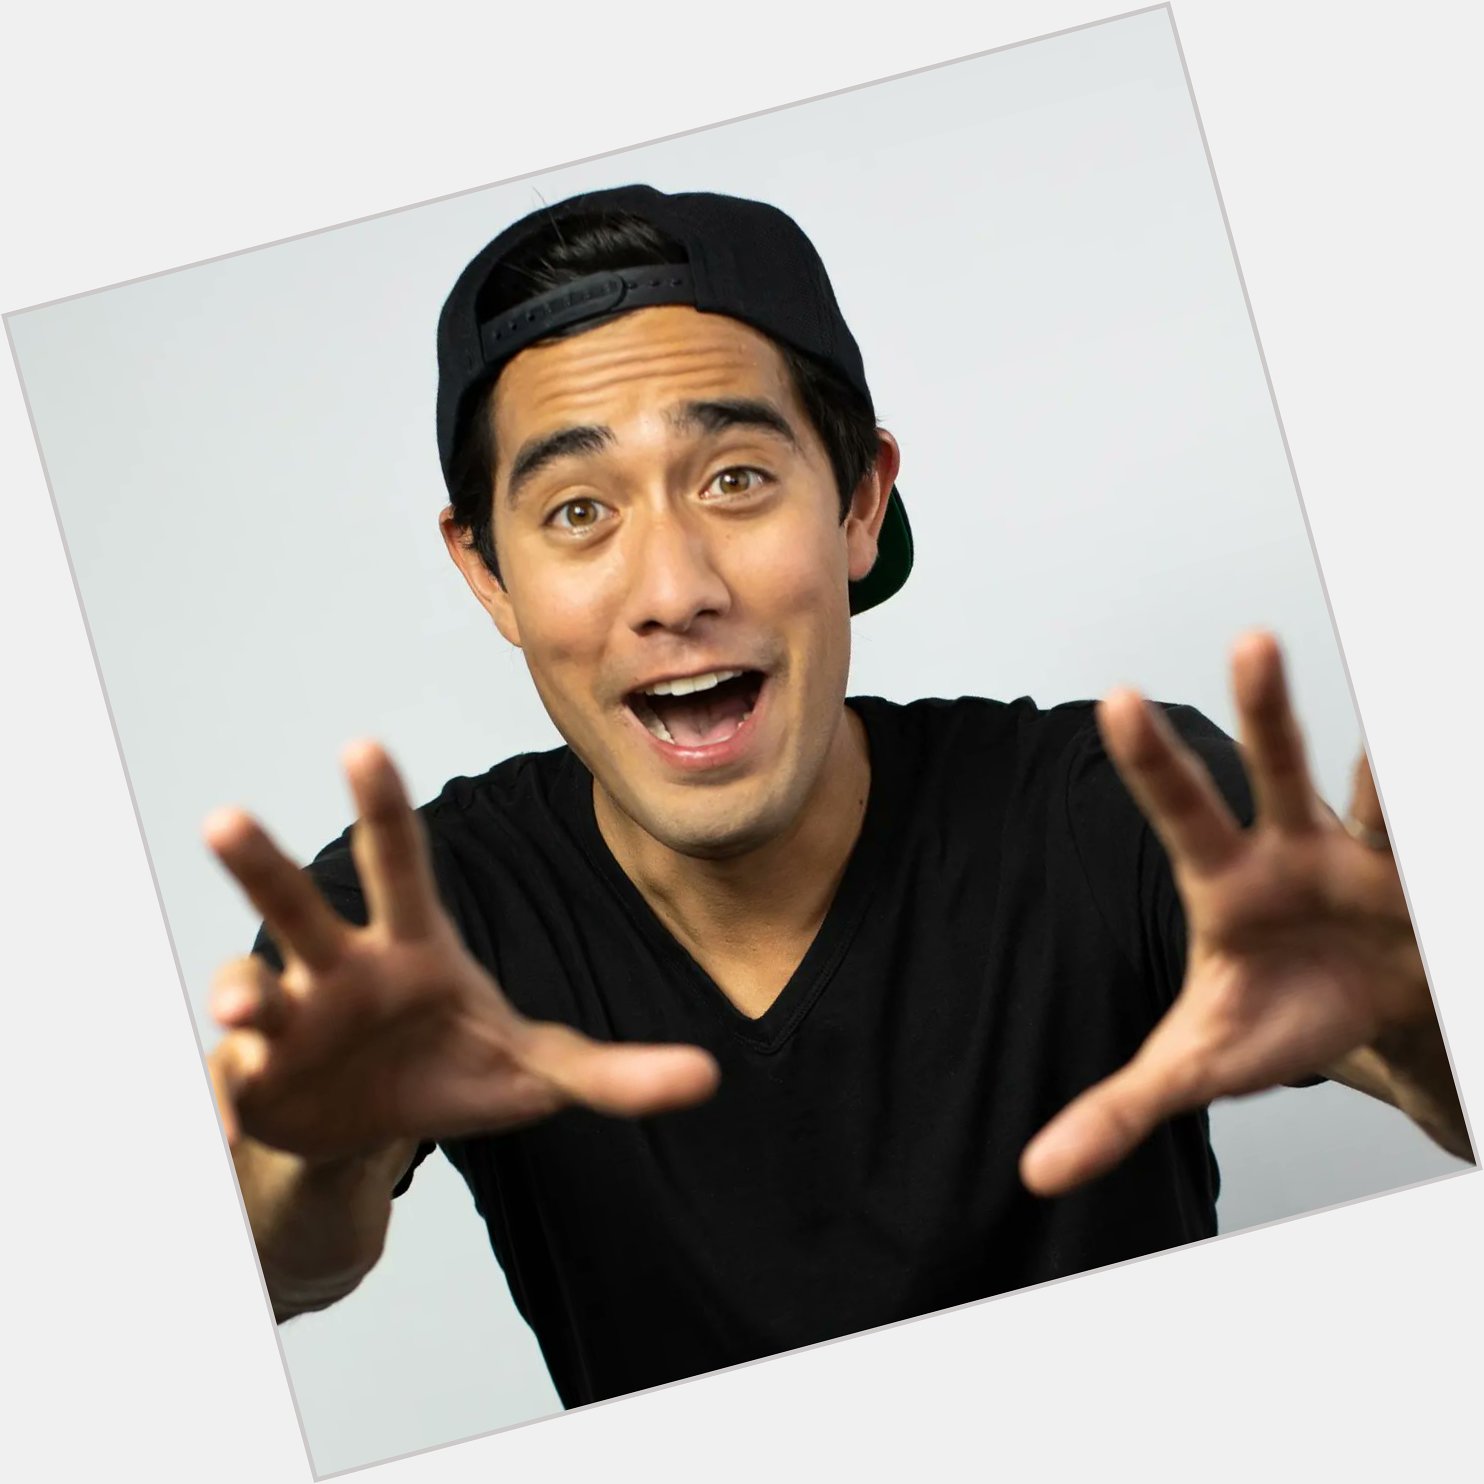 Wishing the Internet Celebrity Mr. Zach King a Very Healthy and Wealthy Happy Birthday with big blast! 